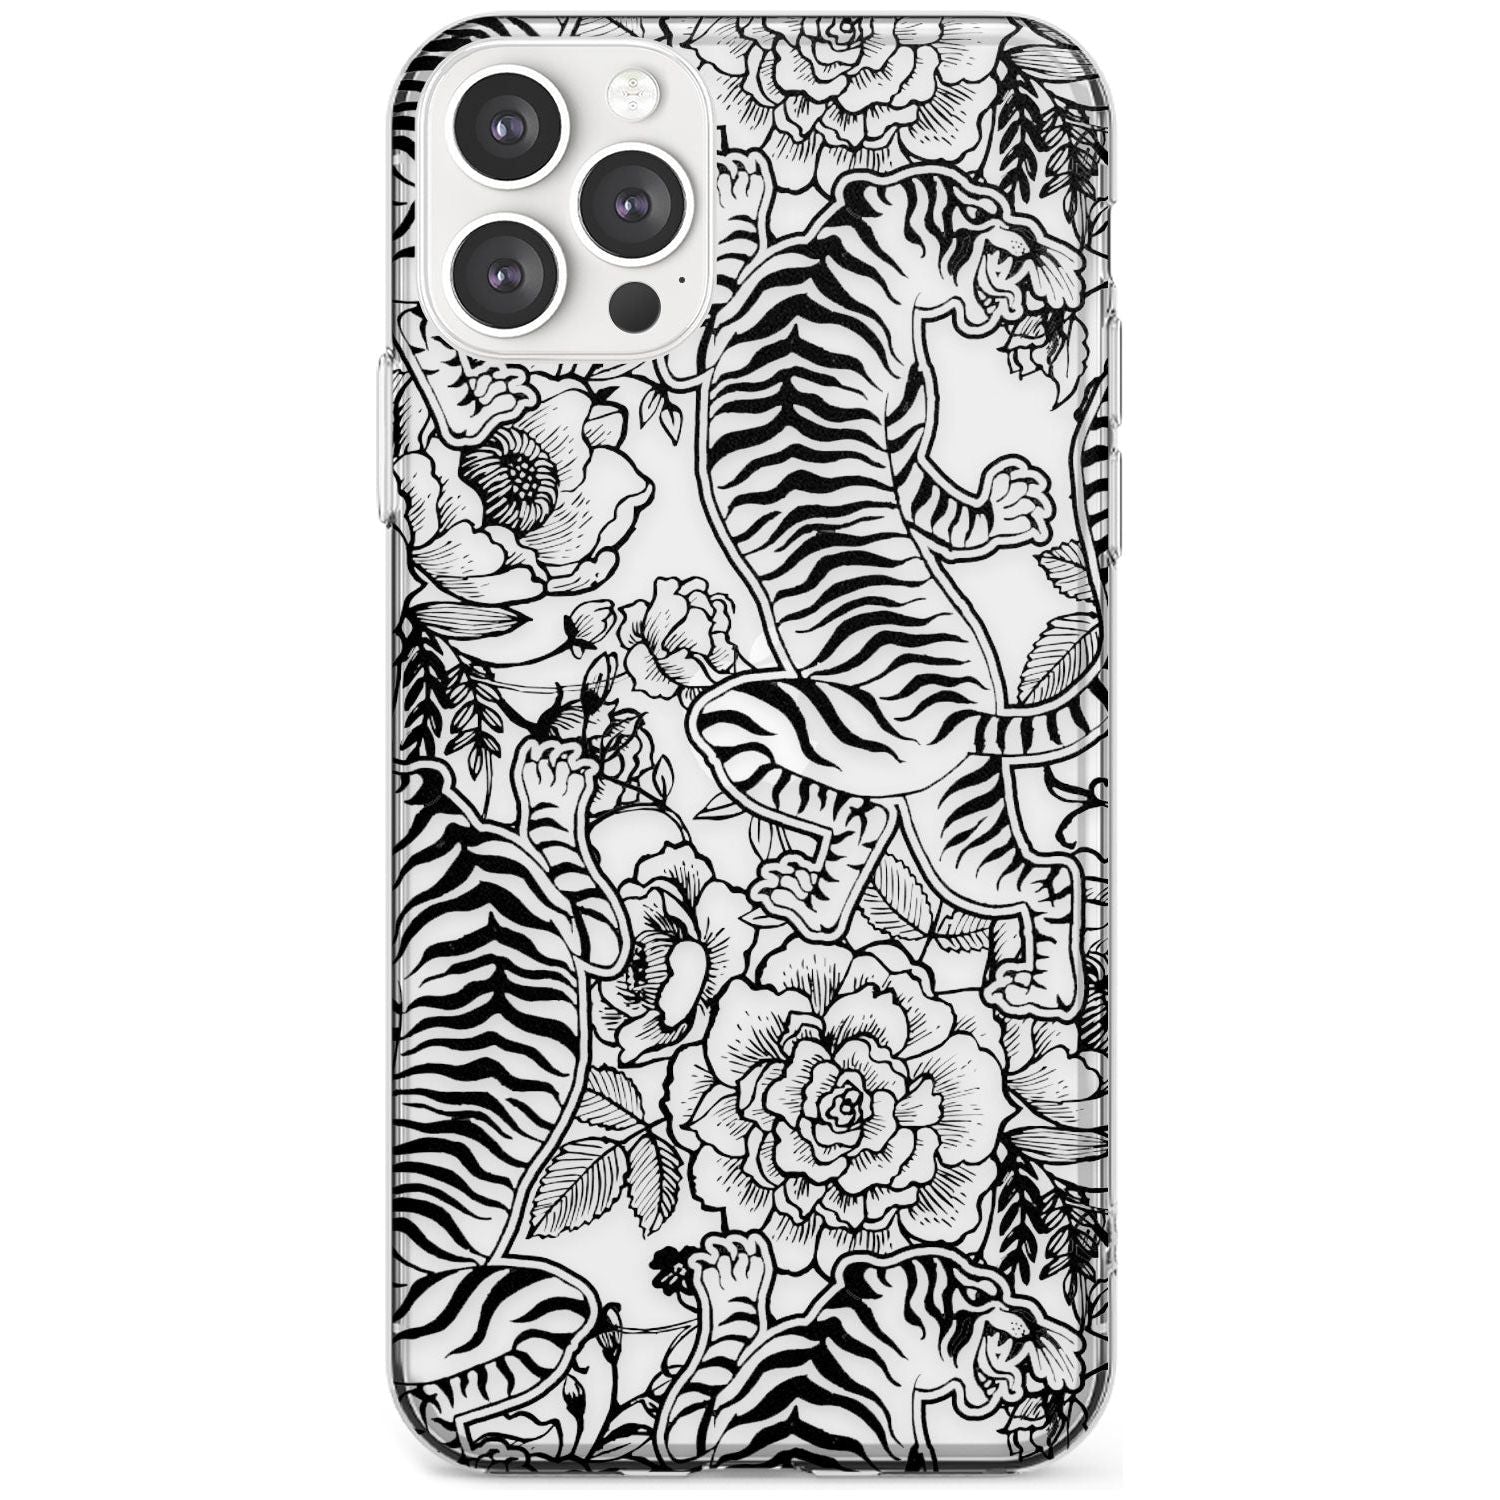 Personalised Chinese Tiger Pattern Slim TPU Phone Case for iPhone 11 Pro Max